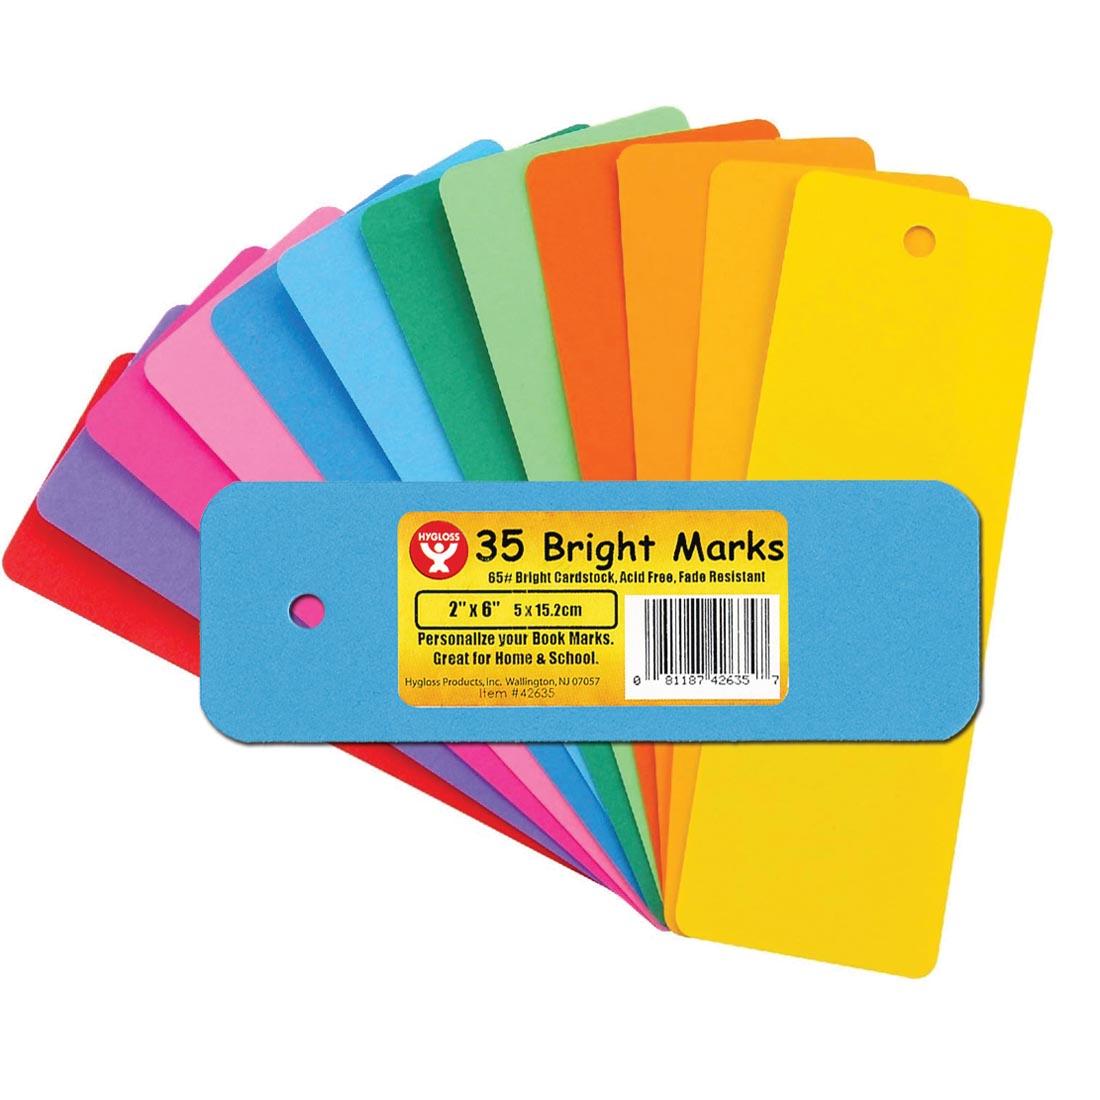 Blank Bright Bookmarks by Hygloss